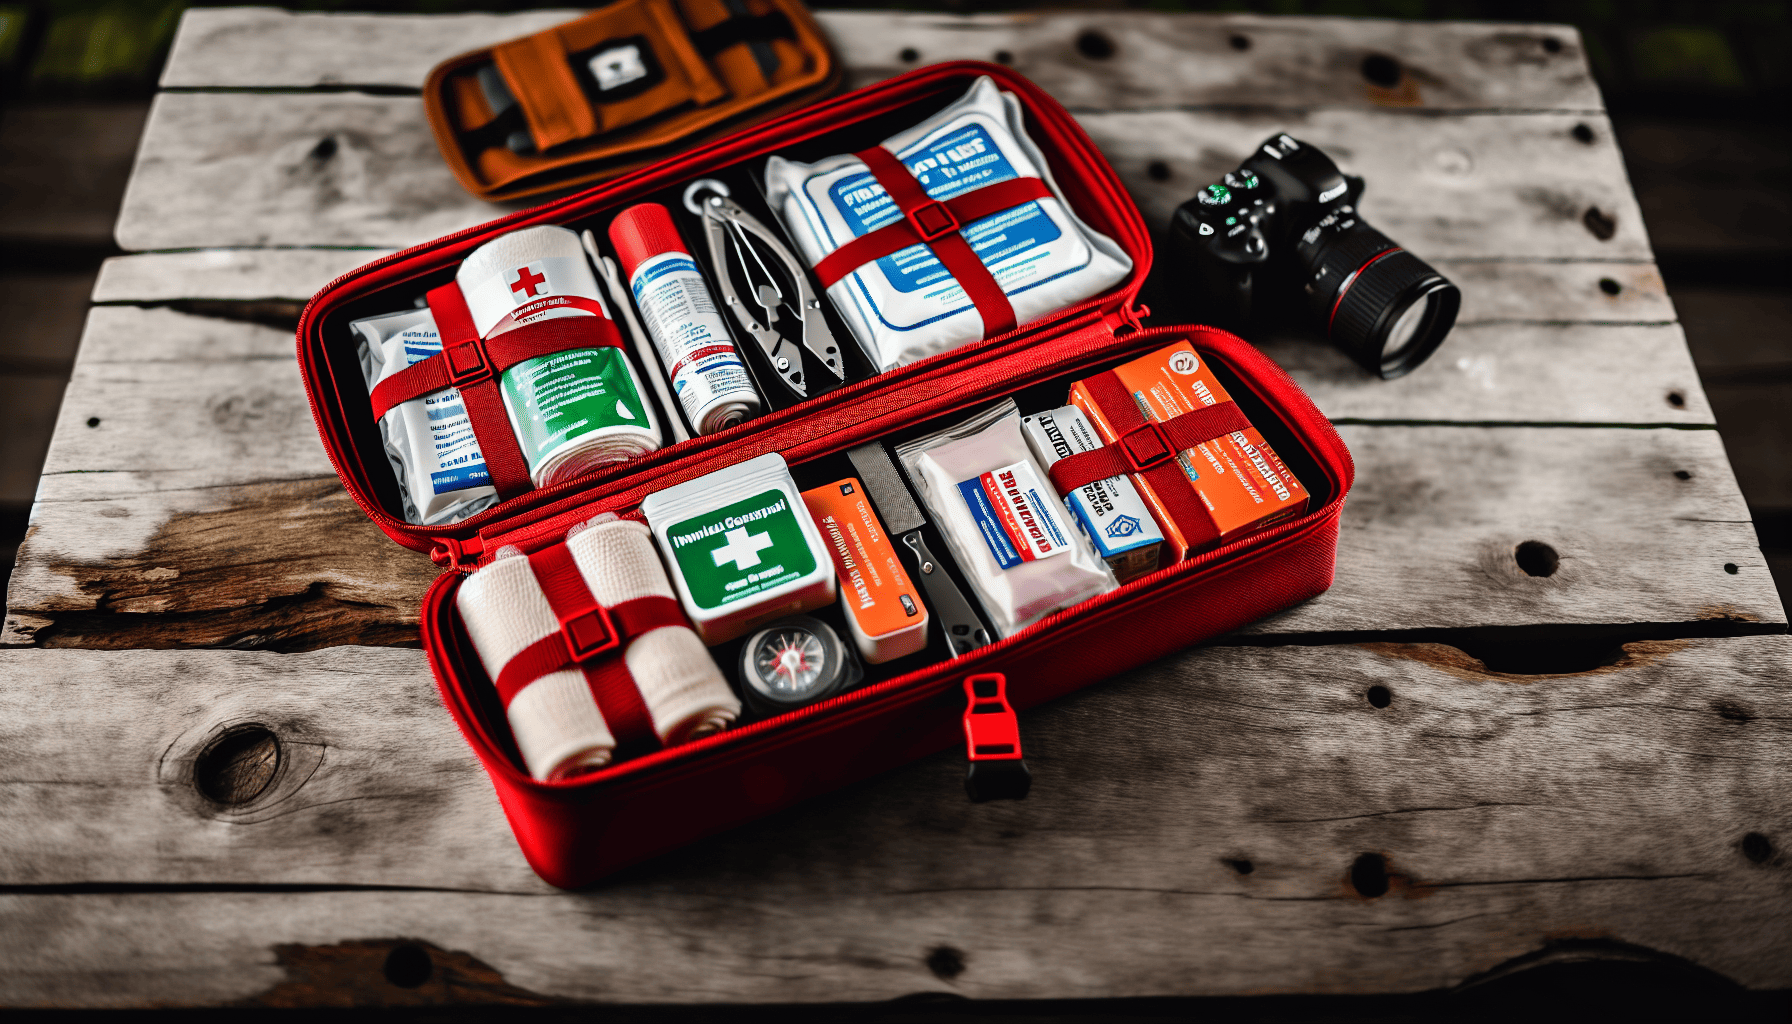 Survival first aid kit for outdoor adventures